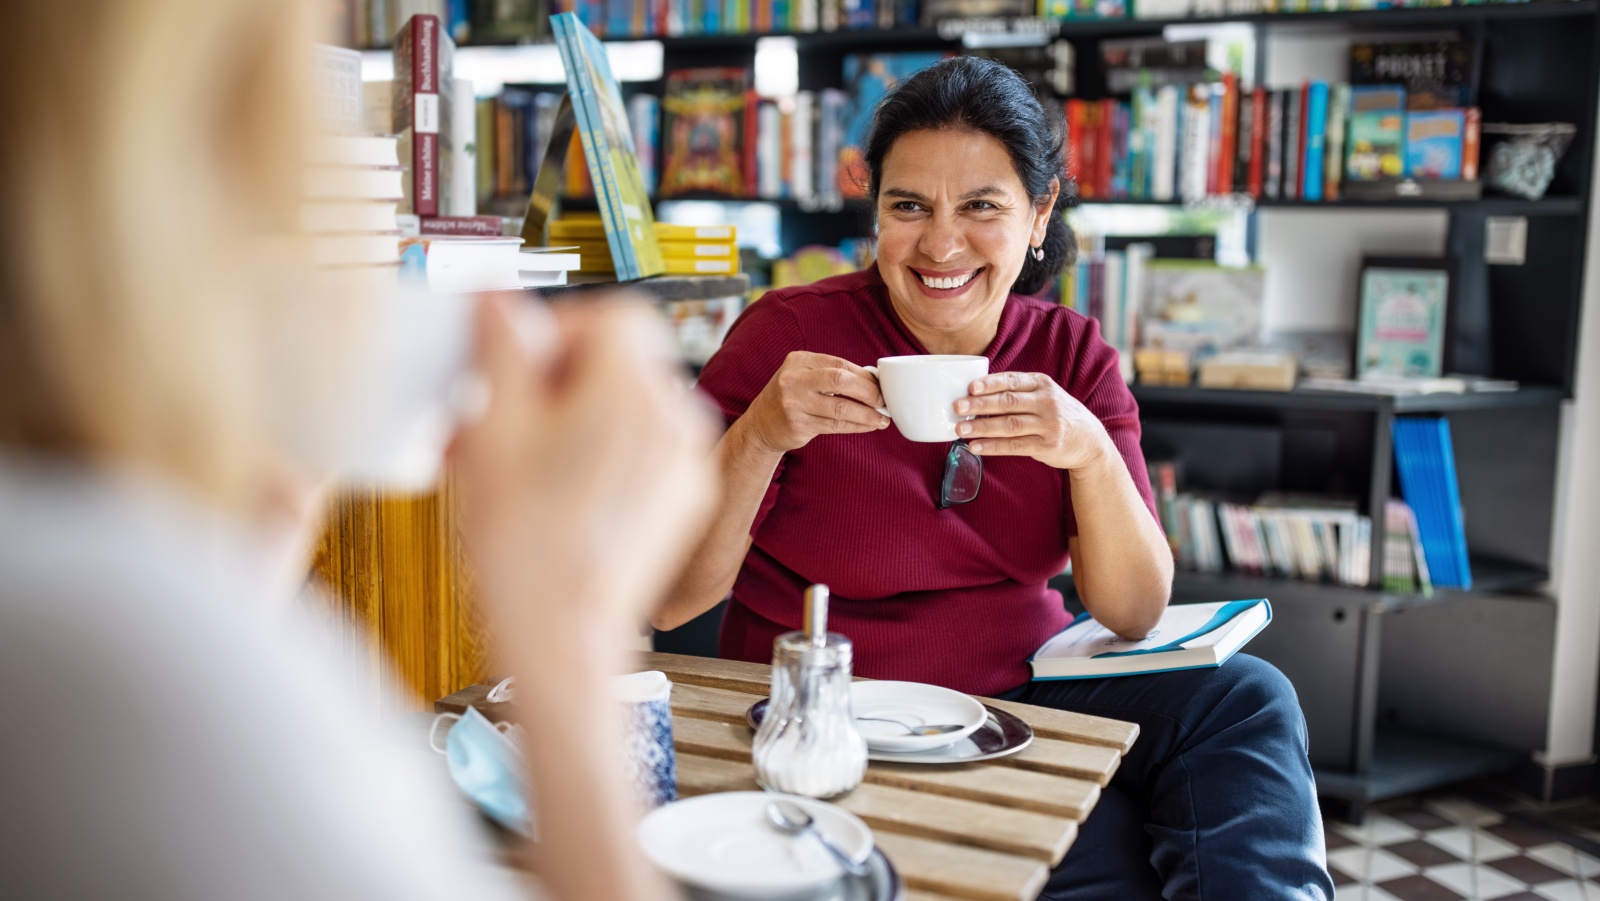 People tend to consider word-of-mouth book recommendations from friends, family or colleagues more trustworthy despite an abundance of reviews and suggestions online, according to a U of A researcher. (Photo: Getty Images)